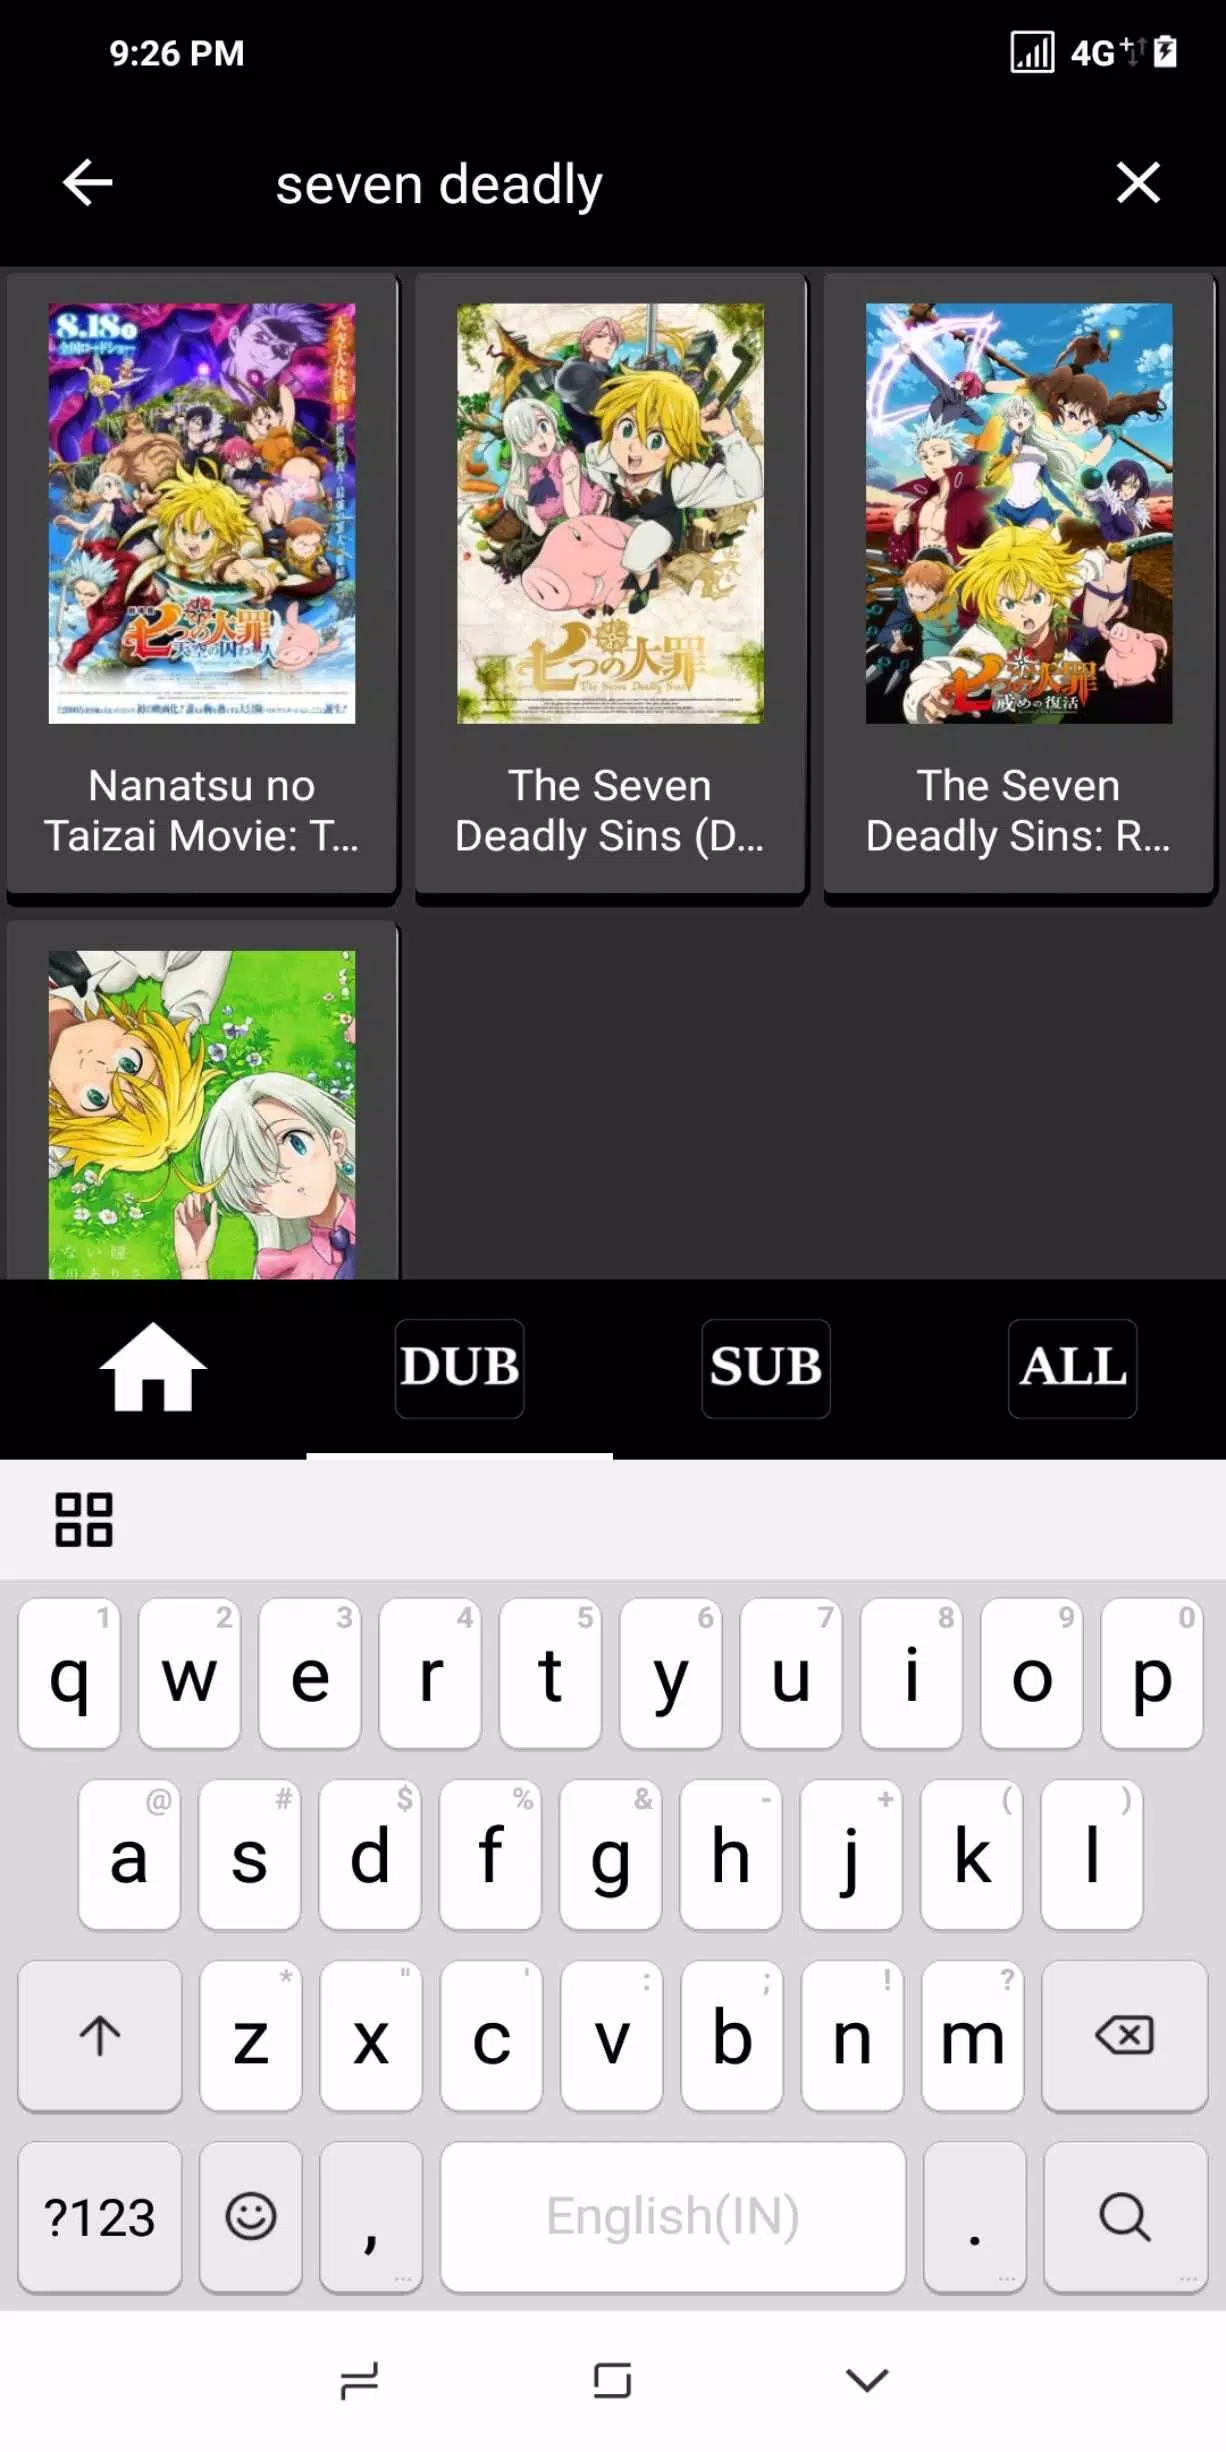 KissAnime App - Watch Anime Online APK 1.0.2 for Android – Download  KissAnime App - Watch Anime Online APK Latest Version from